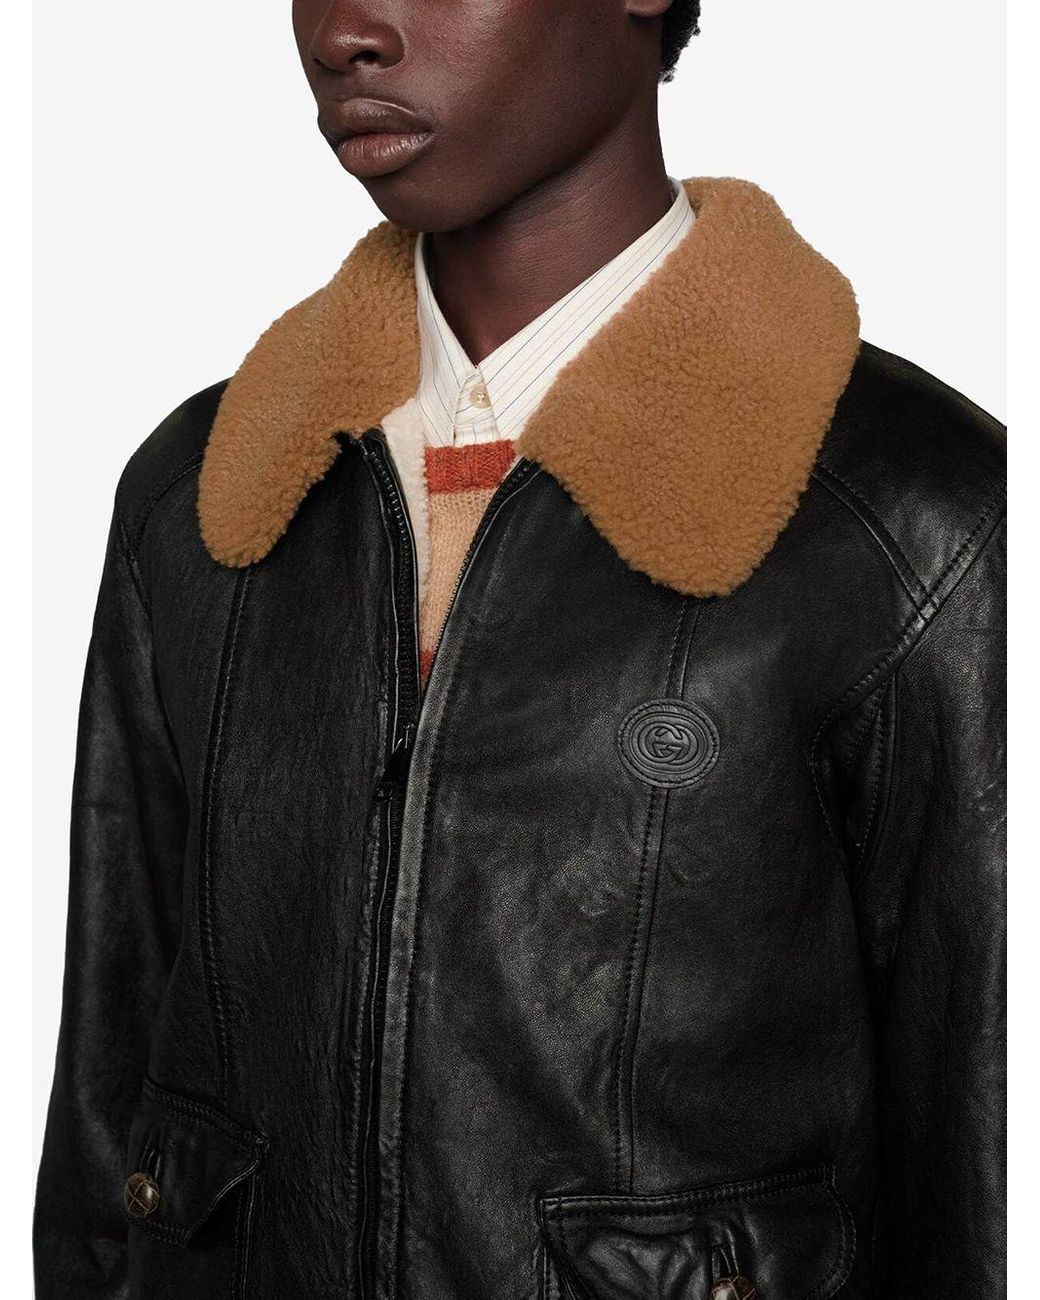 Gucci Shearling Collar Leather Jacket in Black for Men | Lyst